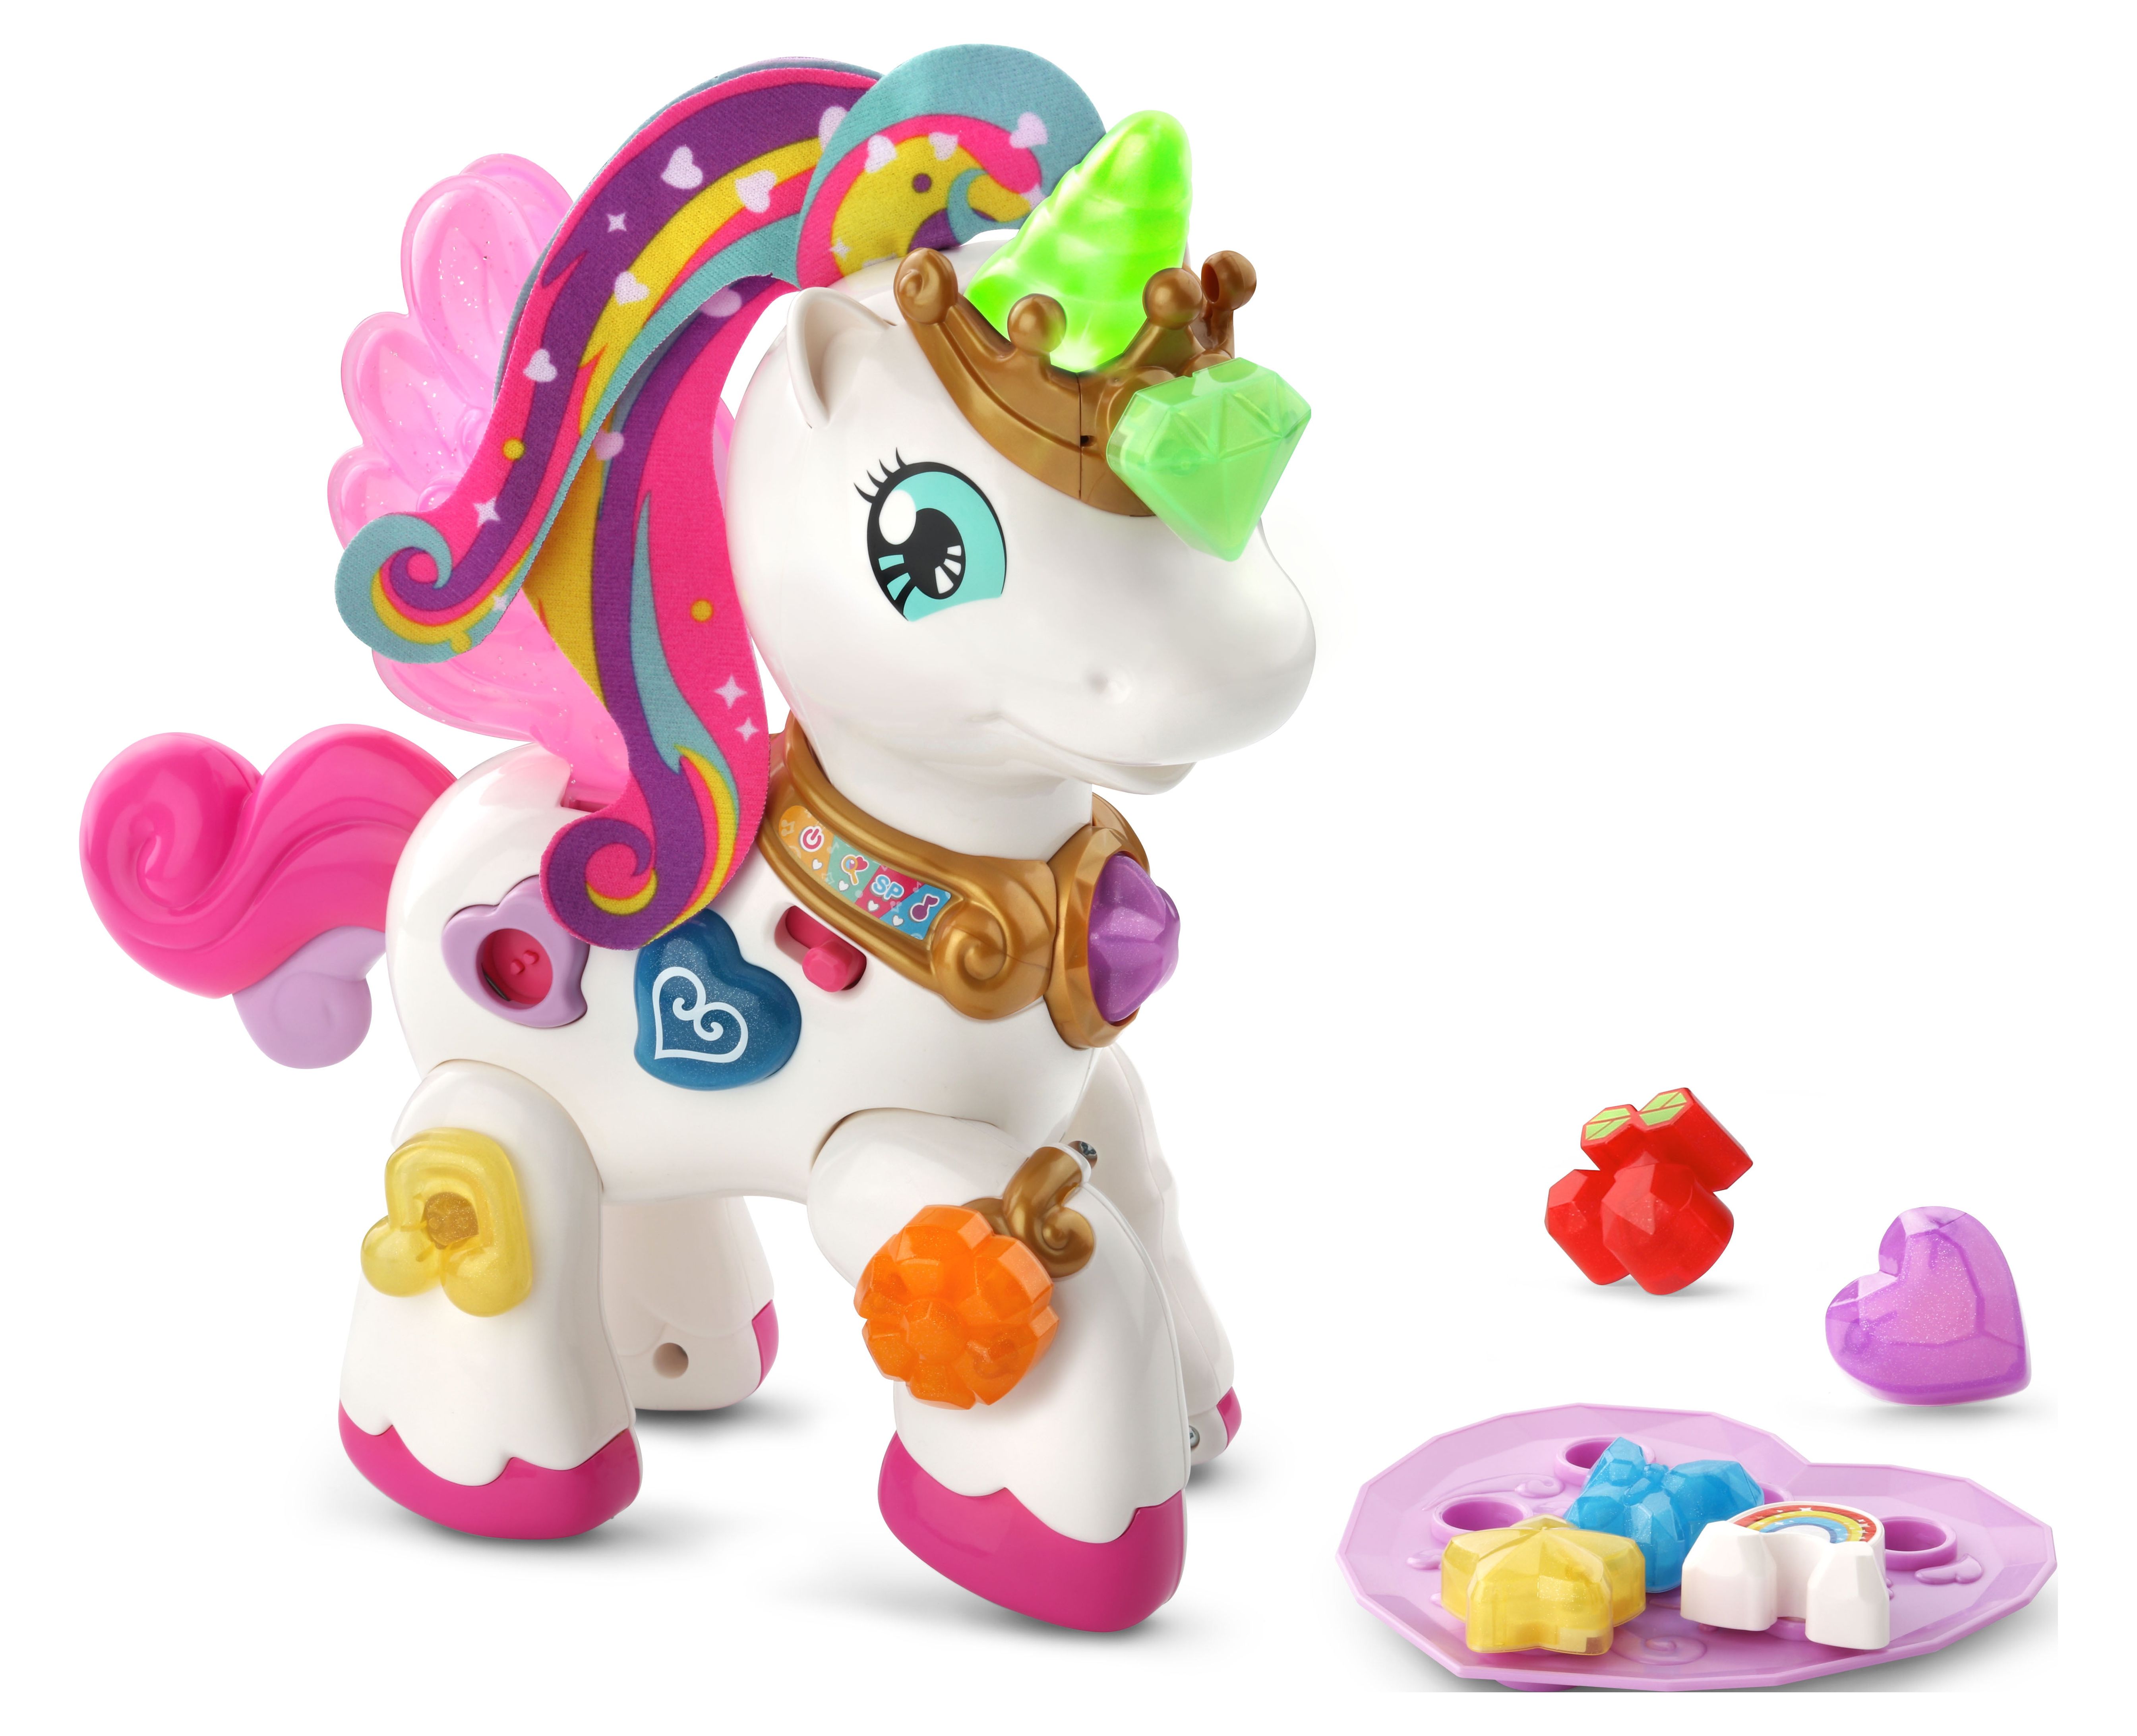 VTech Starshine the Bright Lights Unicorn, Imaginative Play Toy for Toddlers - image 1 of 12